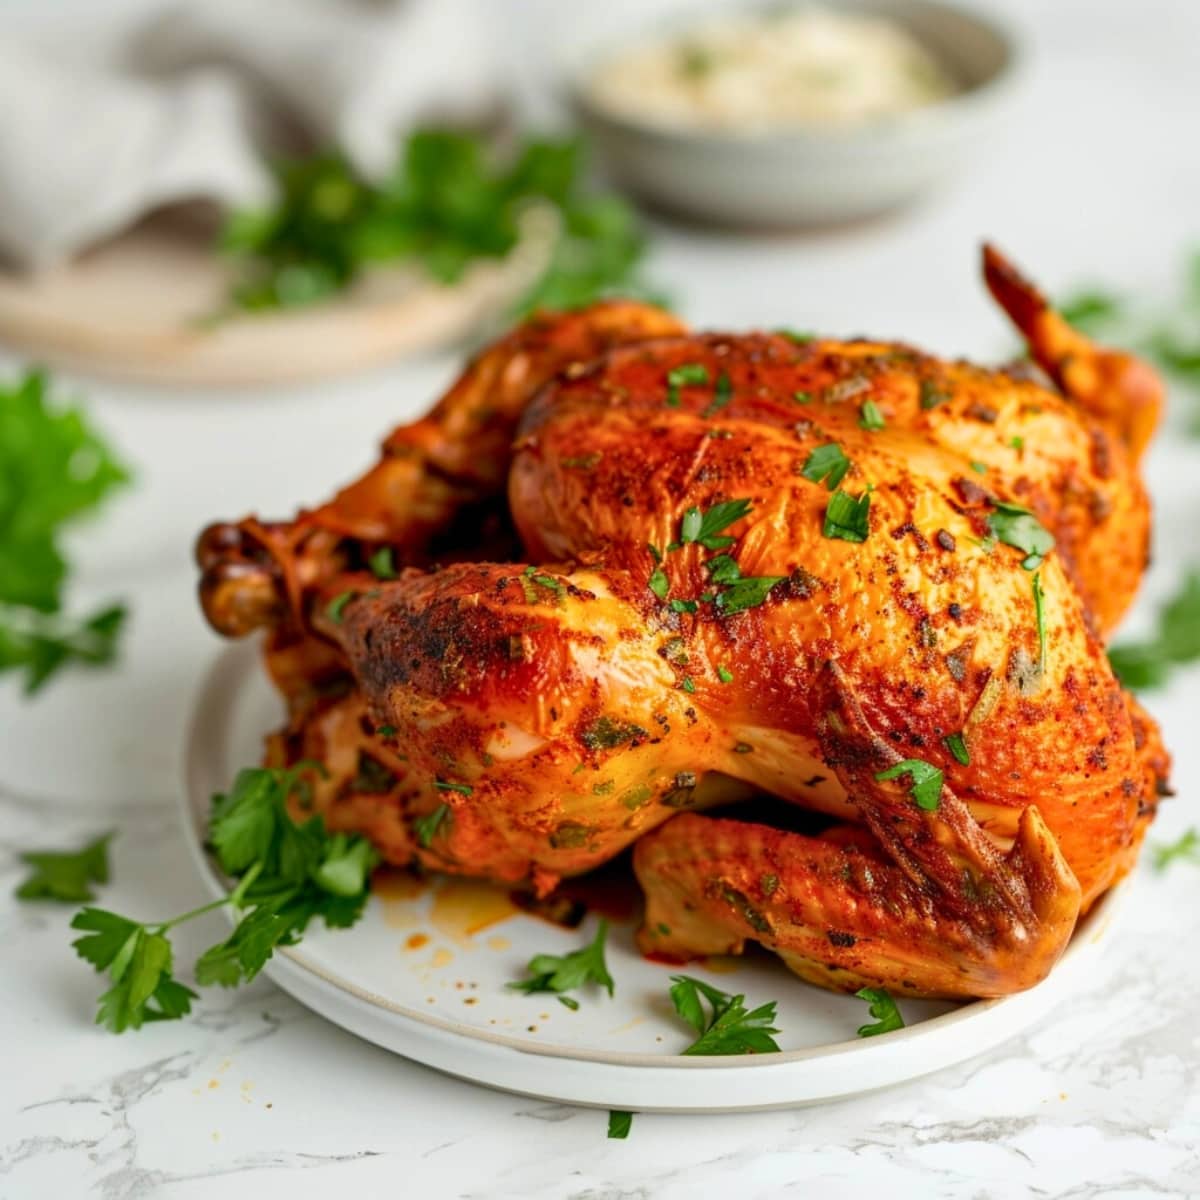 Whole chicken on a white table garnished with copped parsley